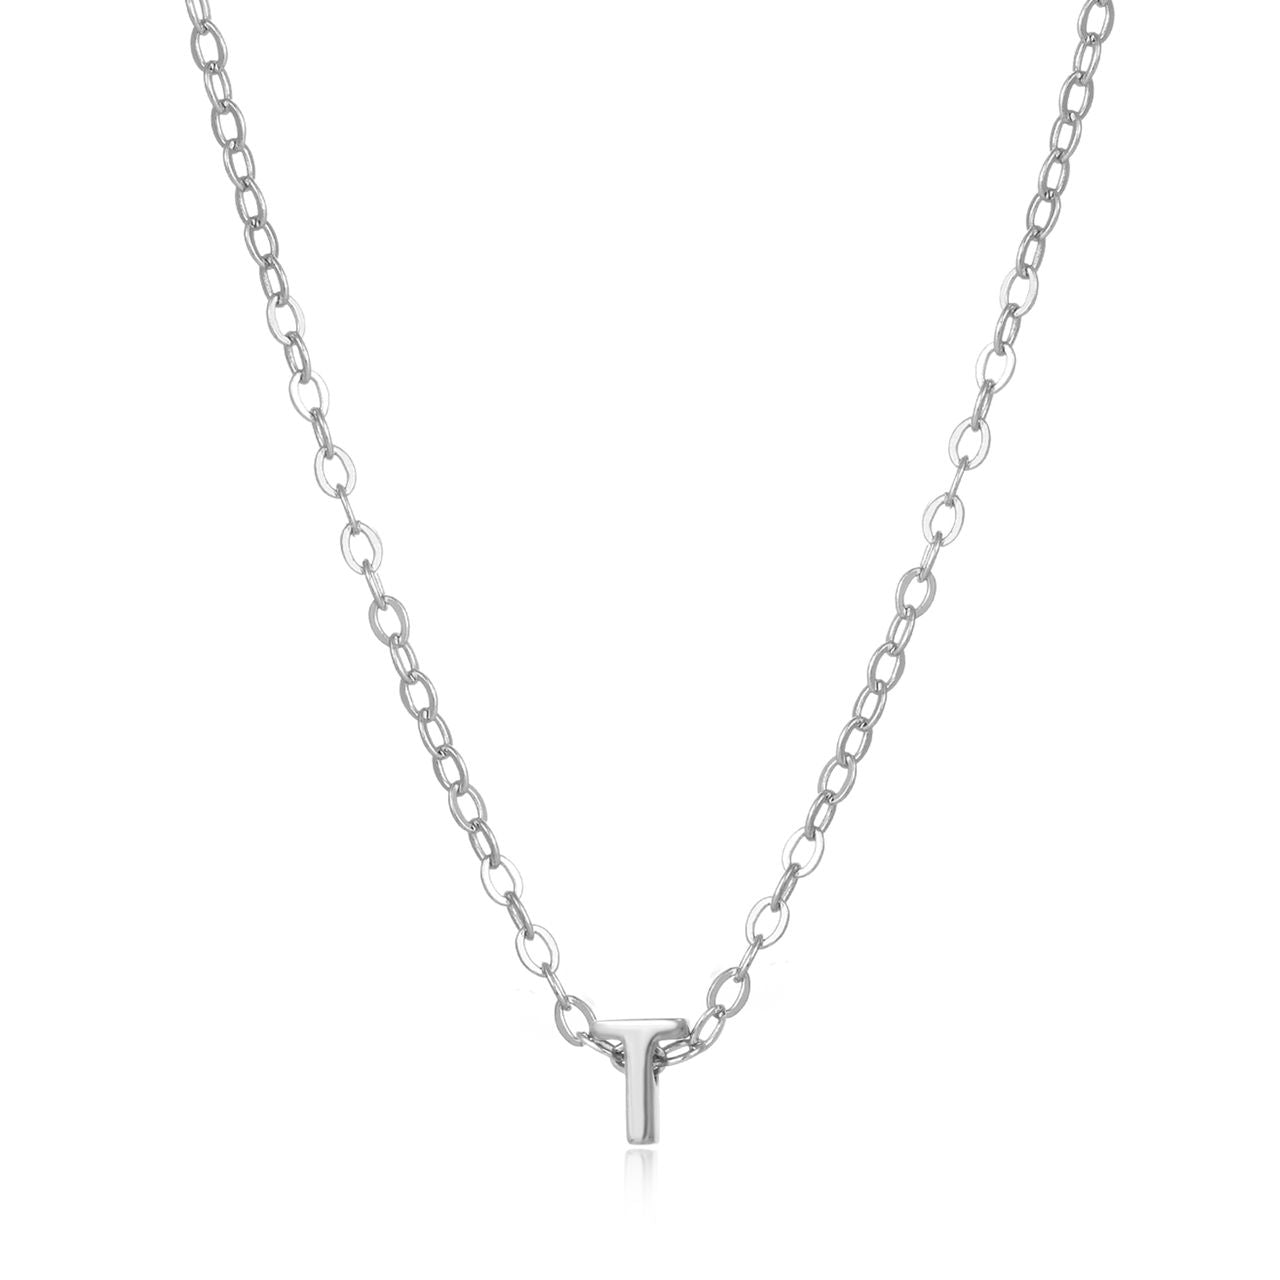 Sterling silver petite necklace featuring a small diamond embellishment